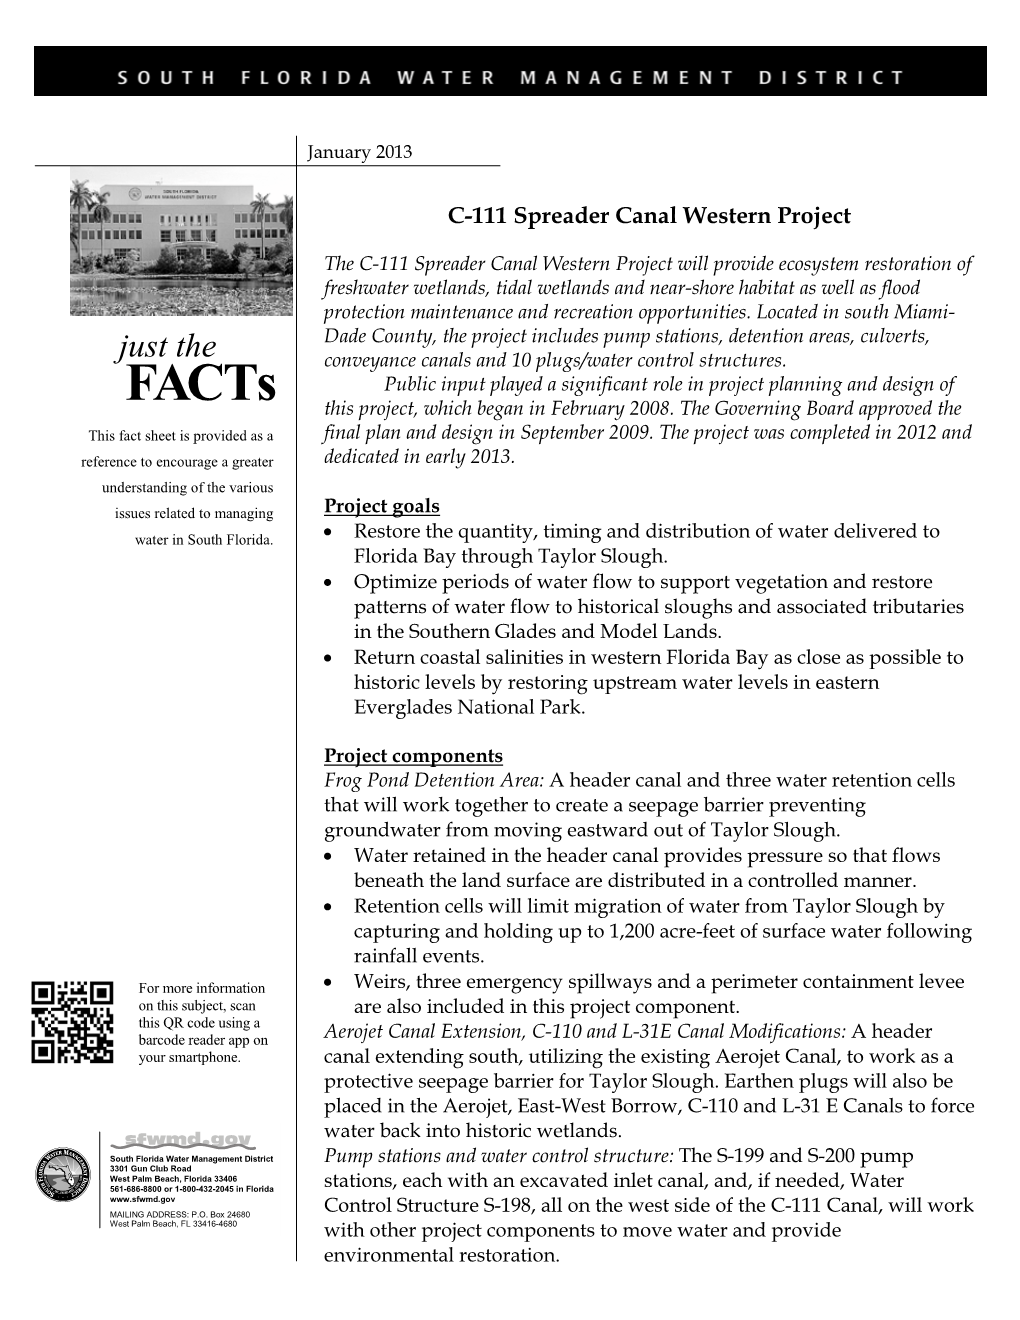 Just the Facts: C-111 Spreader Canal Western Project